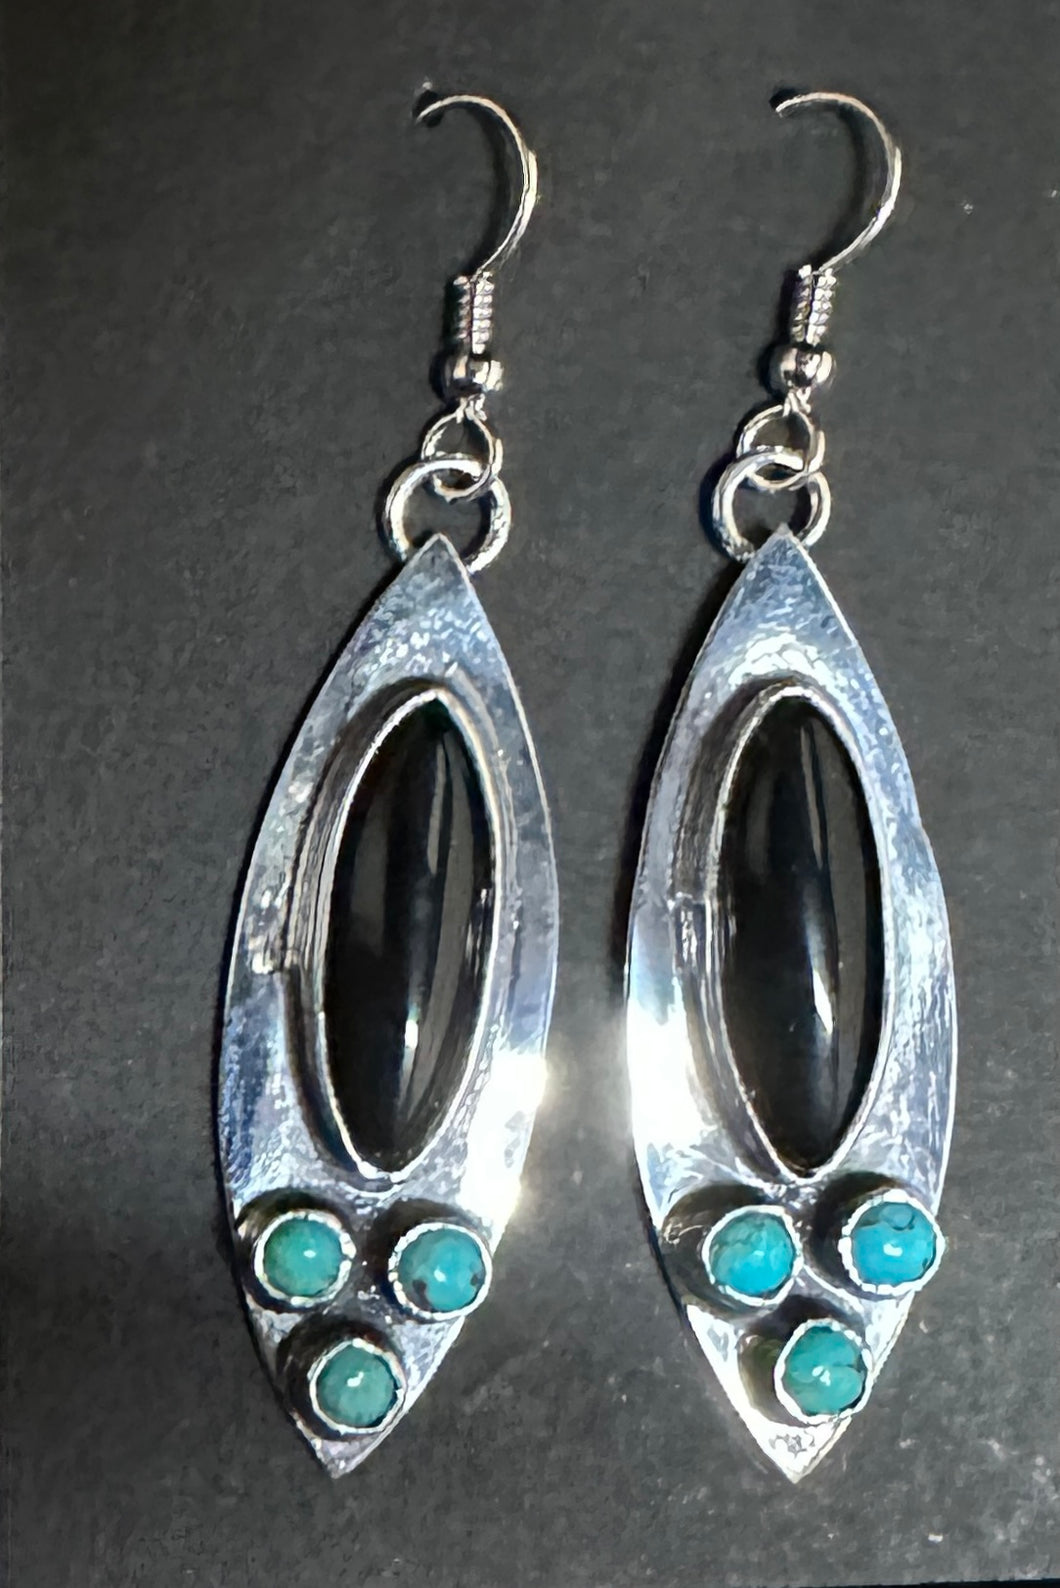 Black Onyx and Turquoise Sterling Silver Earrings